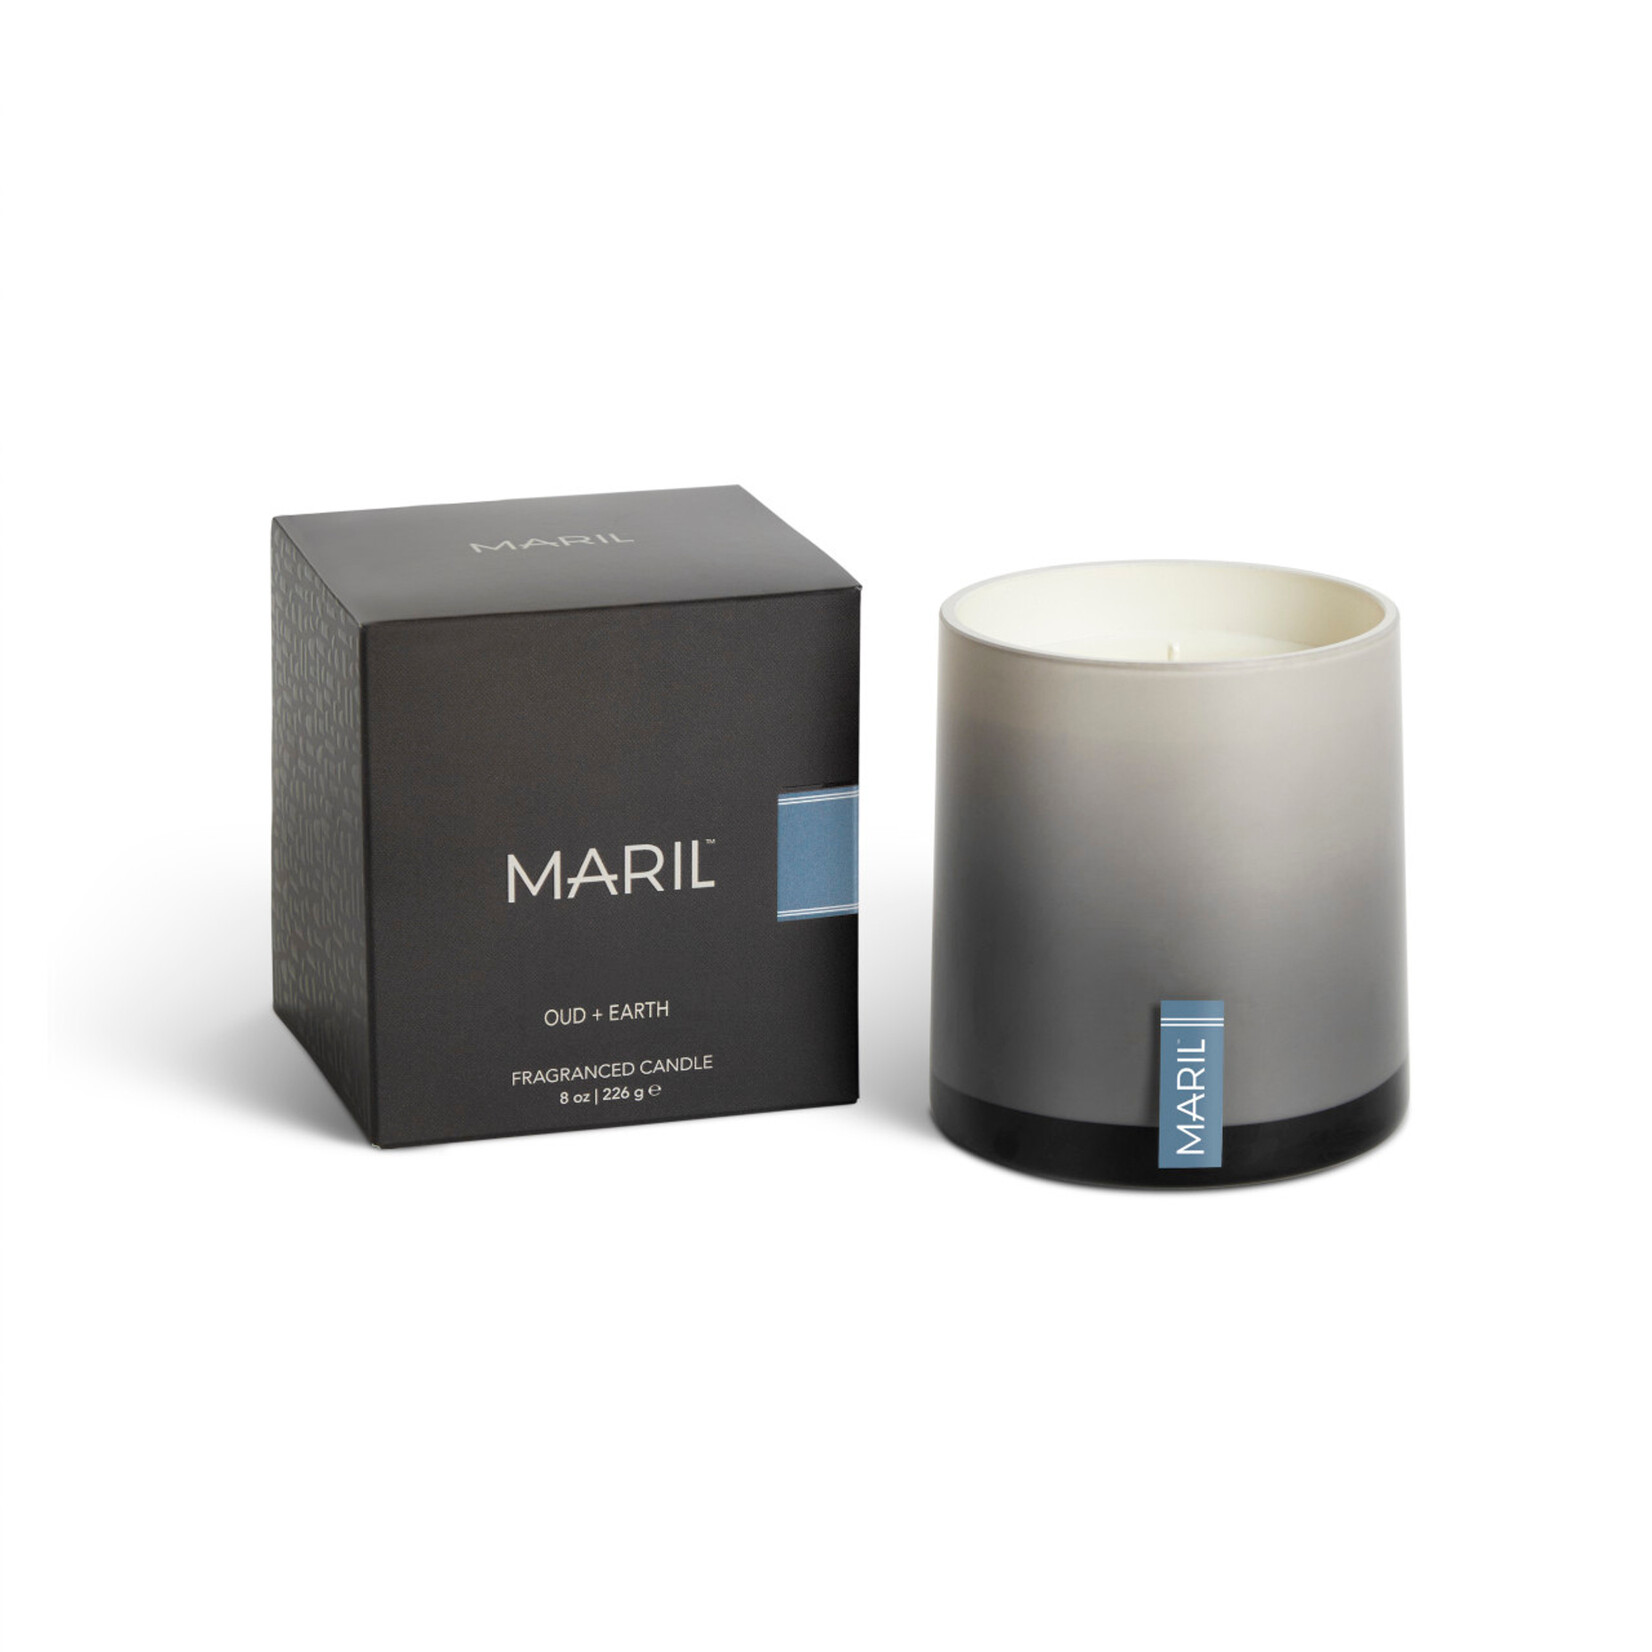 Maril Maril - 8oz Poured Candle - Oud & Earth